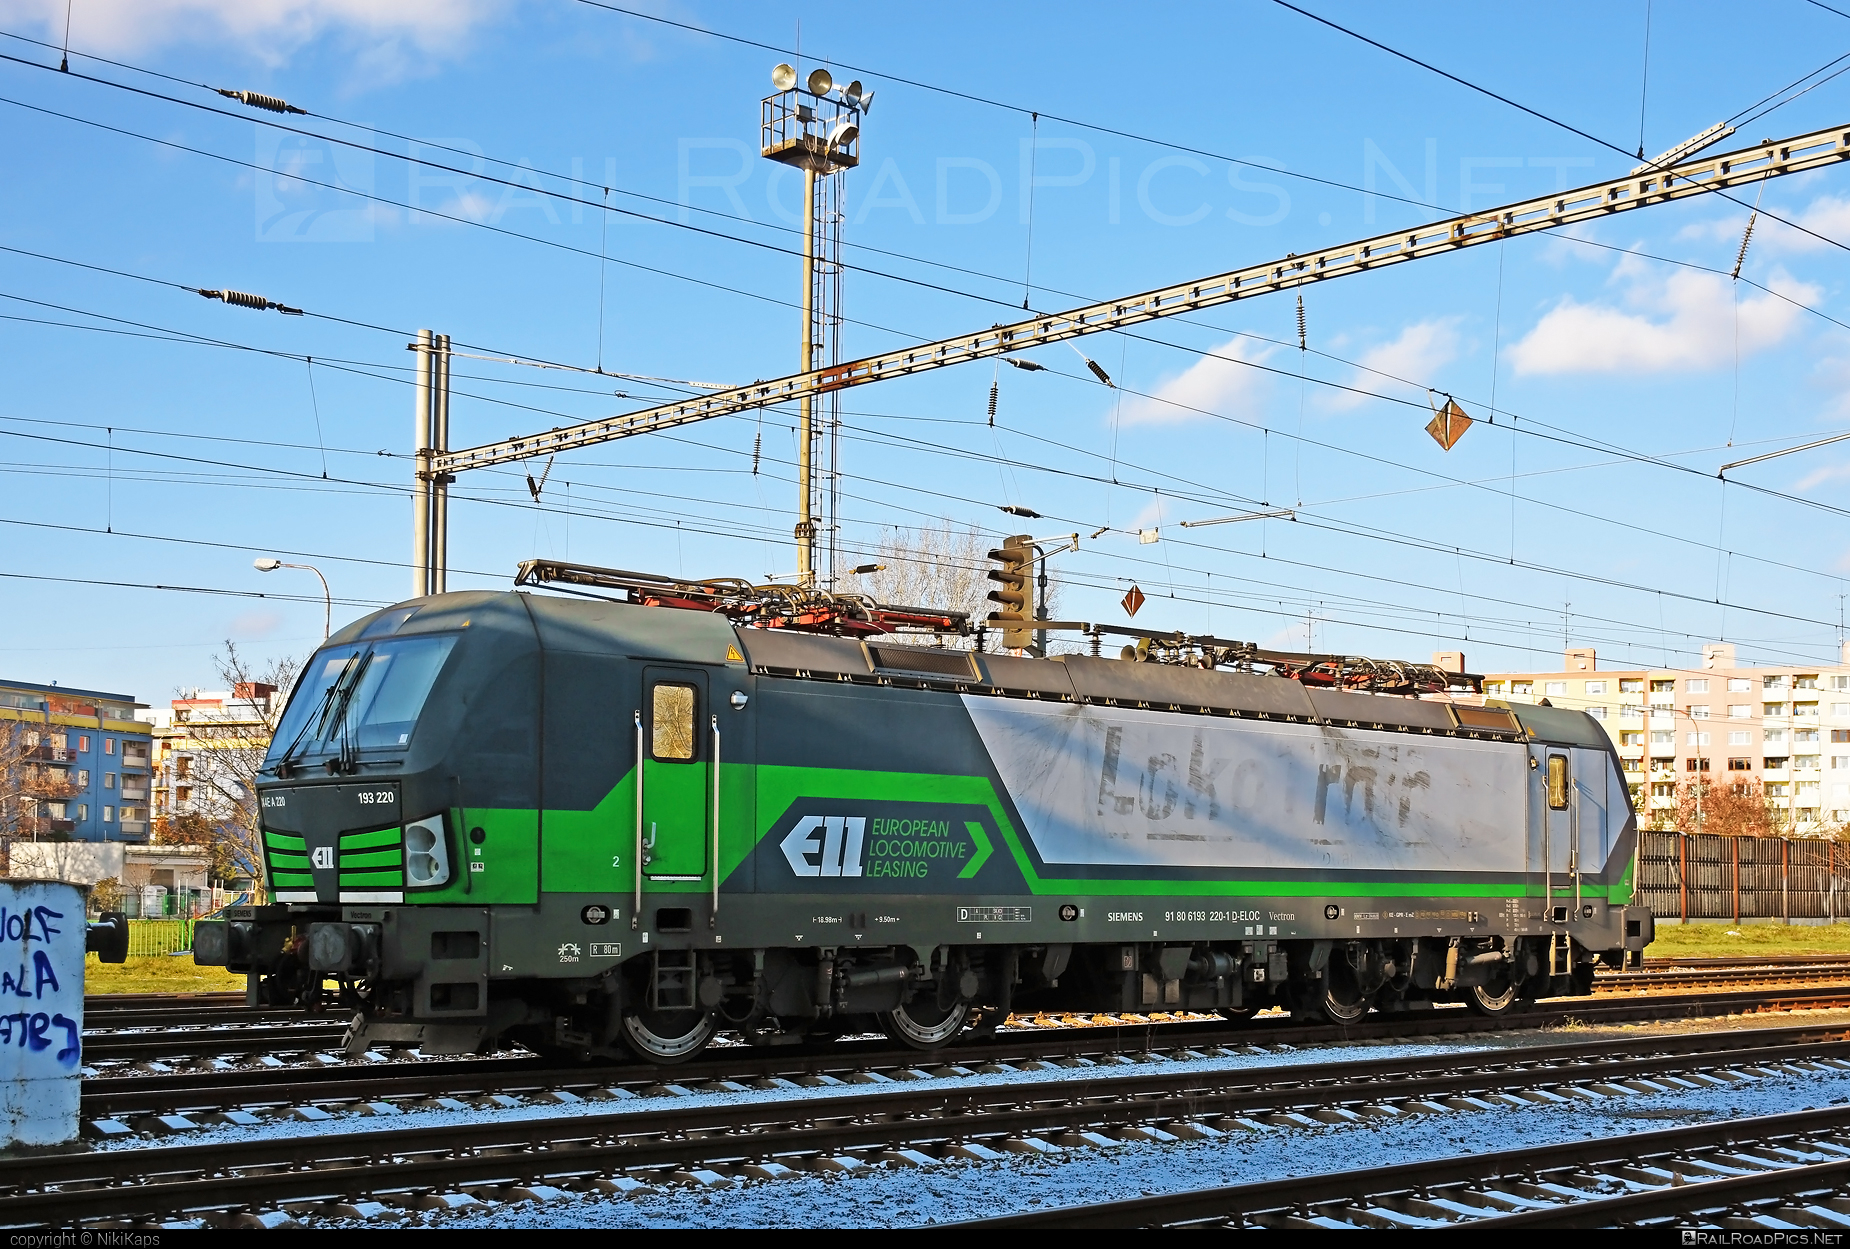 Siemens Vectron MS - 193 220 operated by METRANS Rail s.r.o. #ell #ellgermany #eloc #europeanlocomotiveleasing #hhla #metrans #metransrail #siemens #siemensVectron #siemensVectronMS #vectron #vectronMS